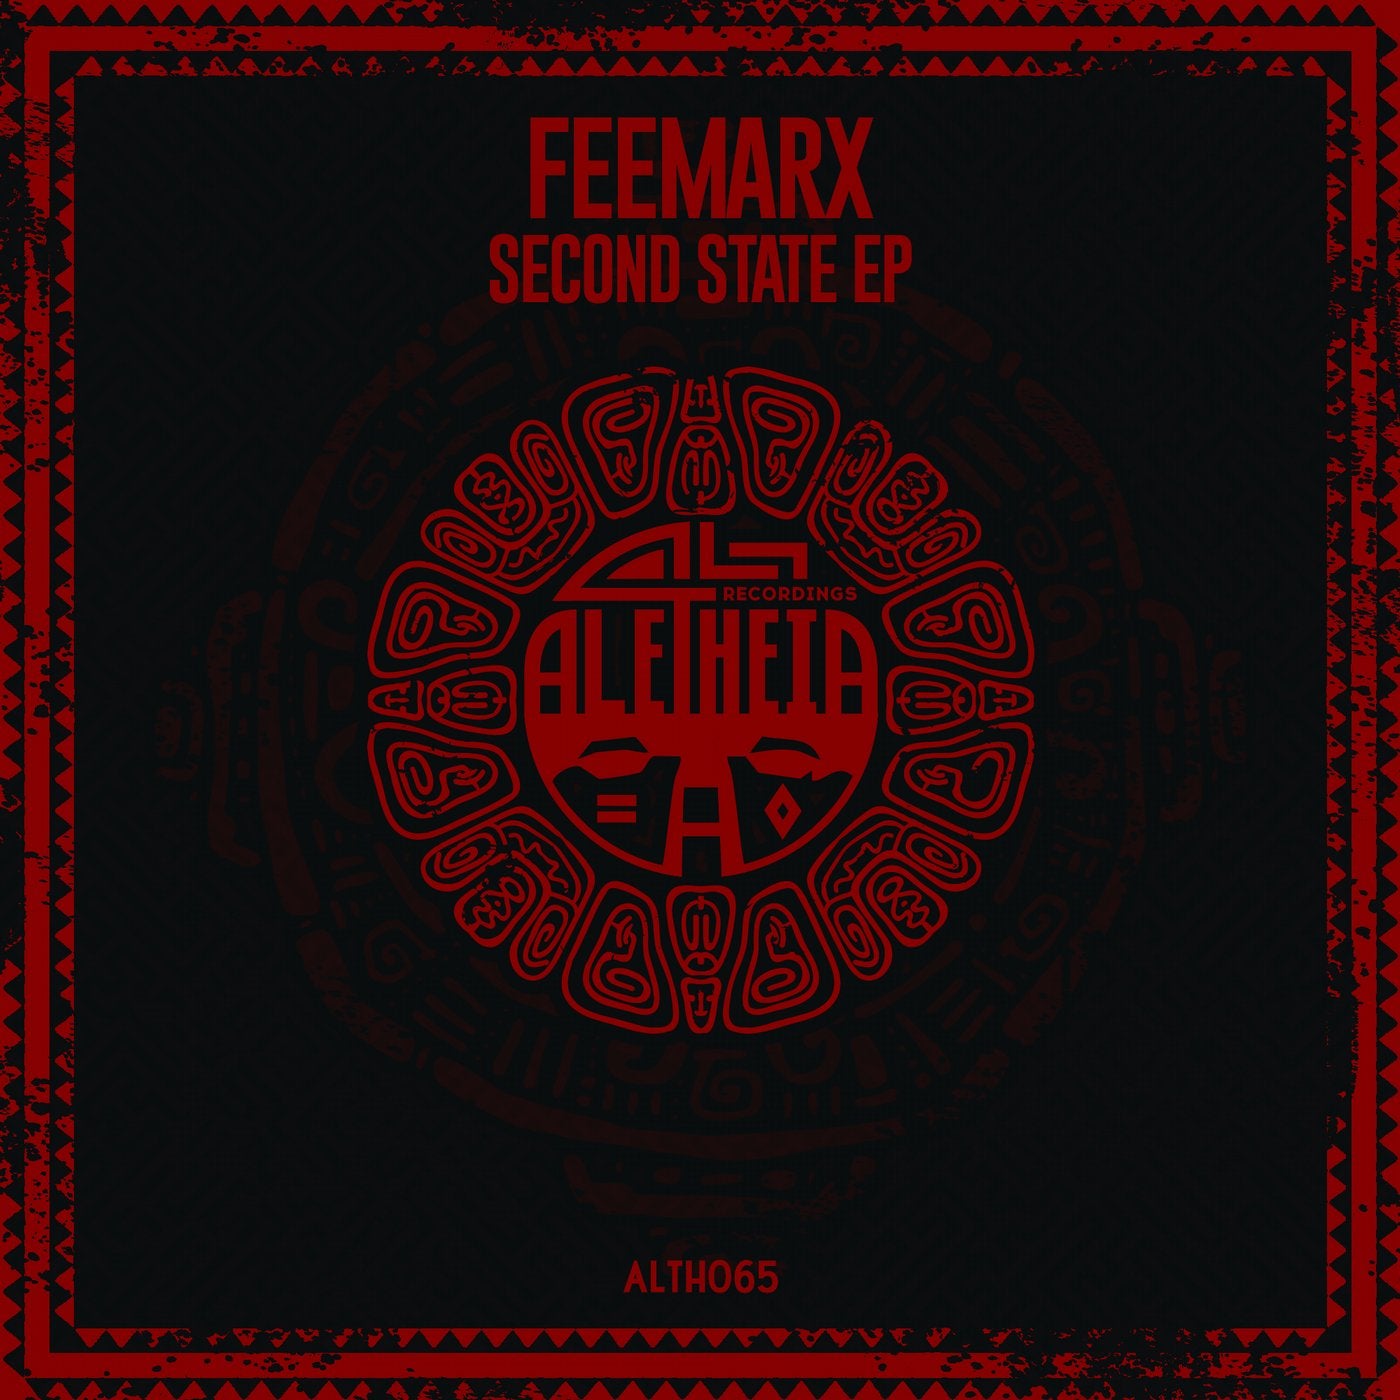 Second State EP